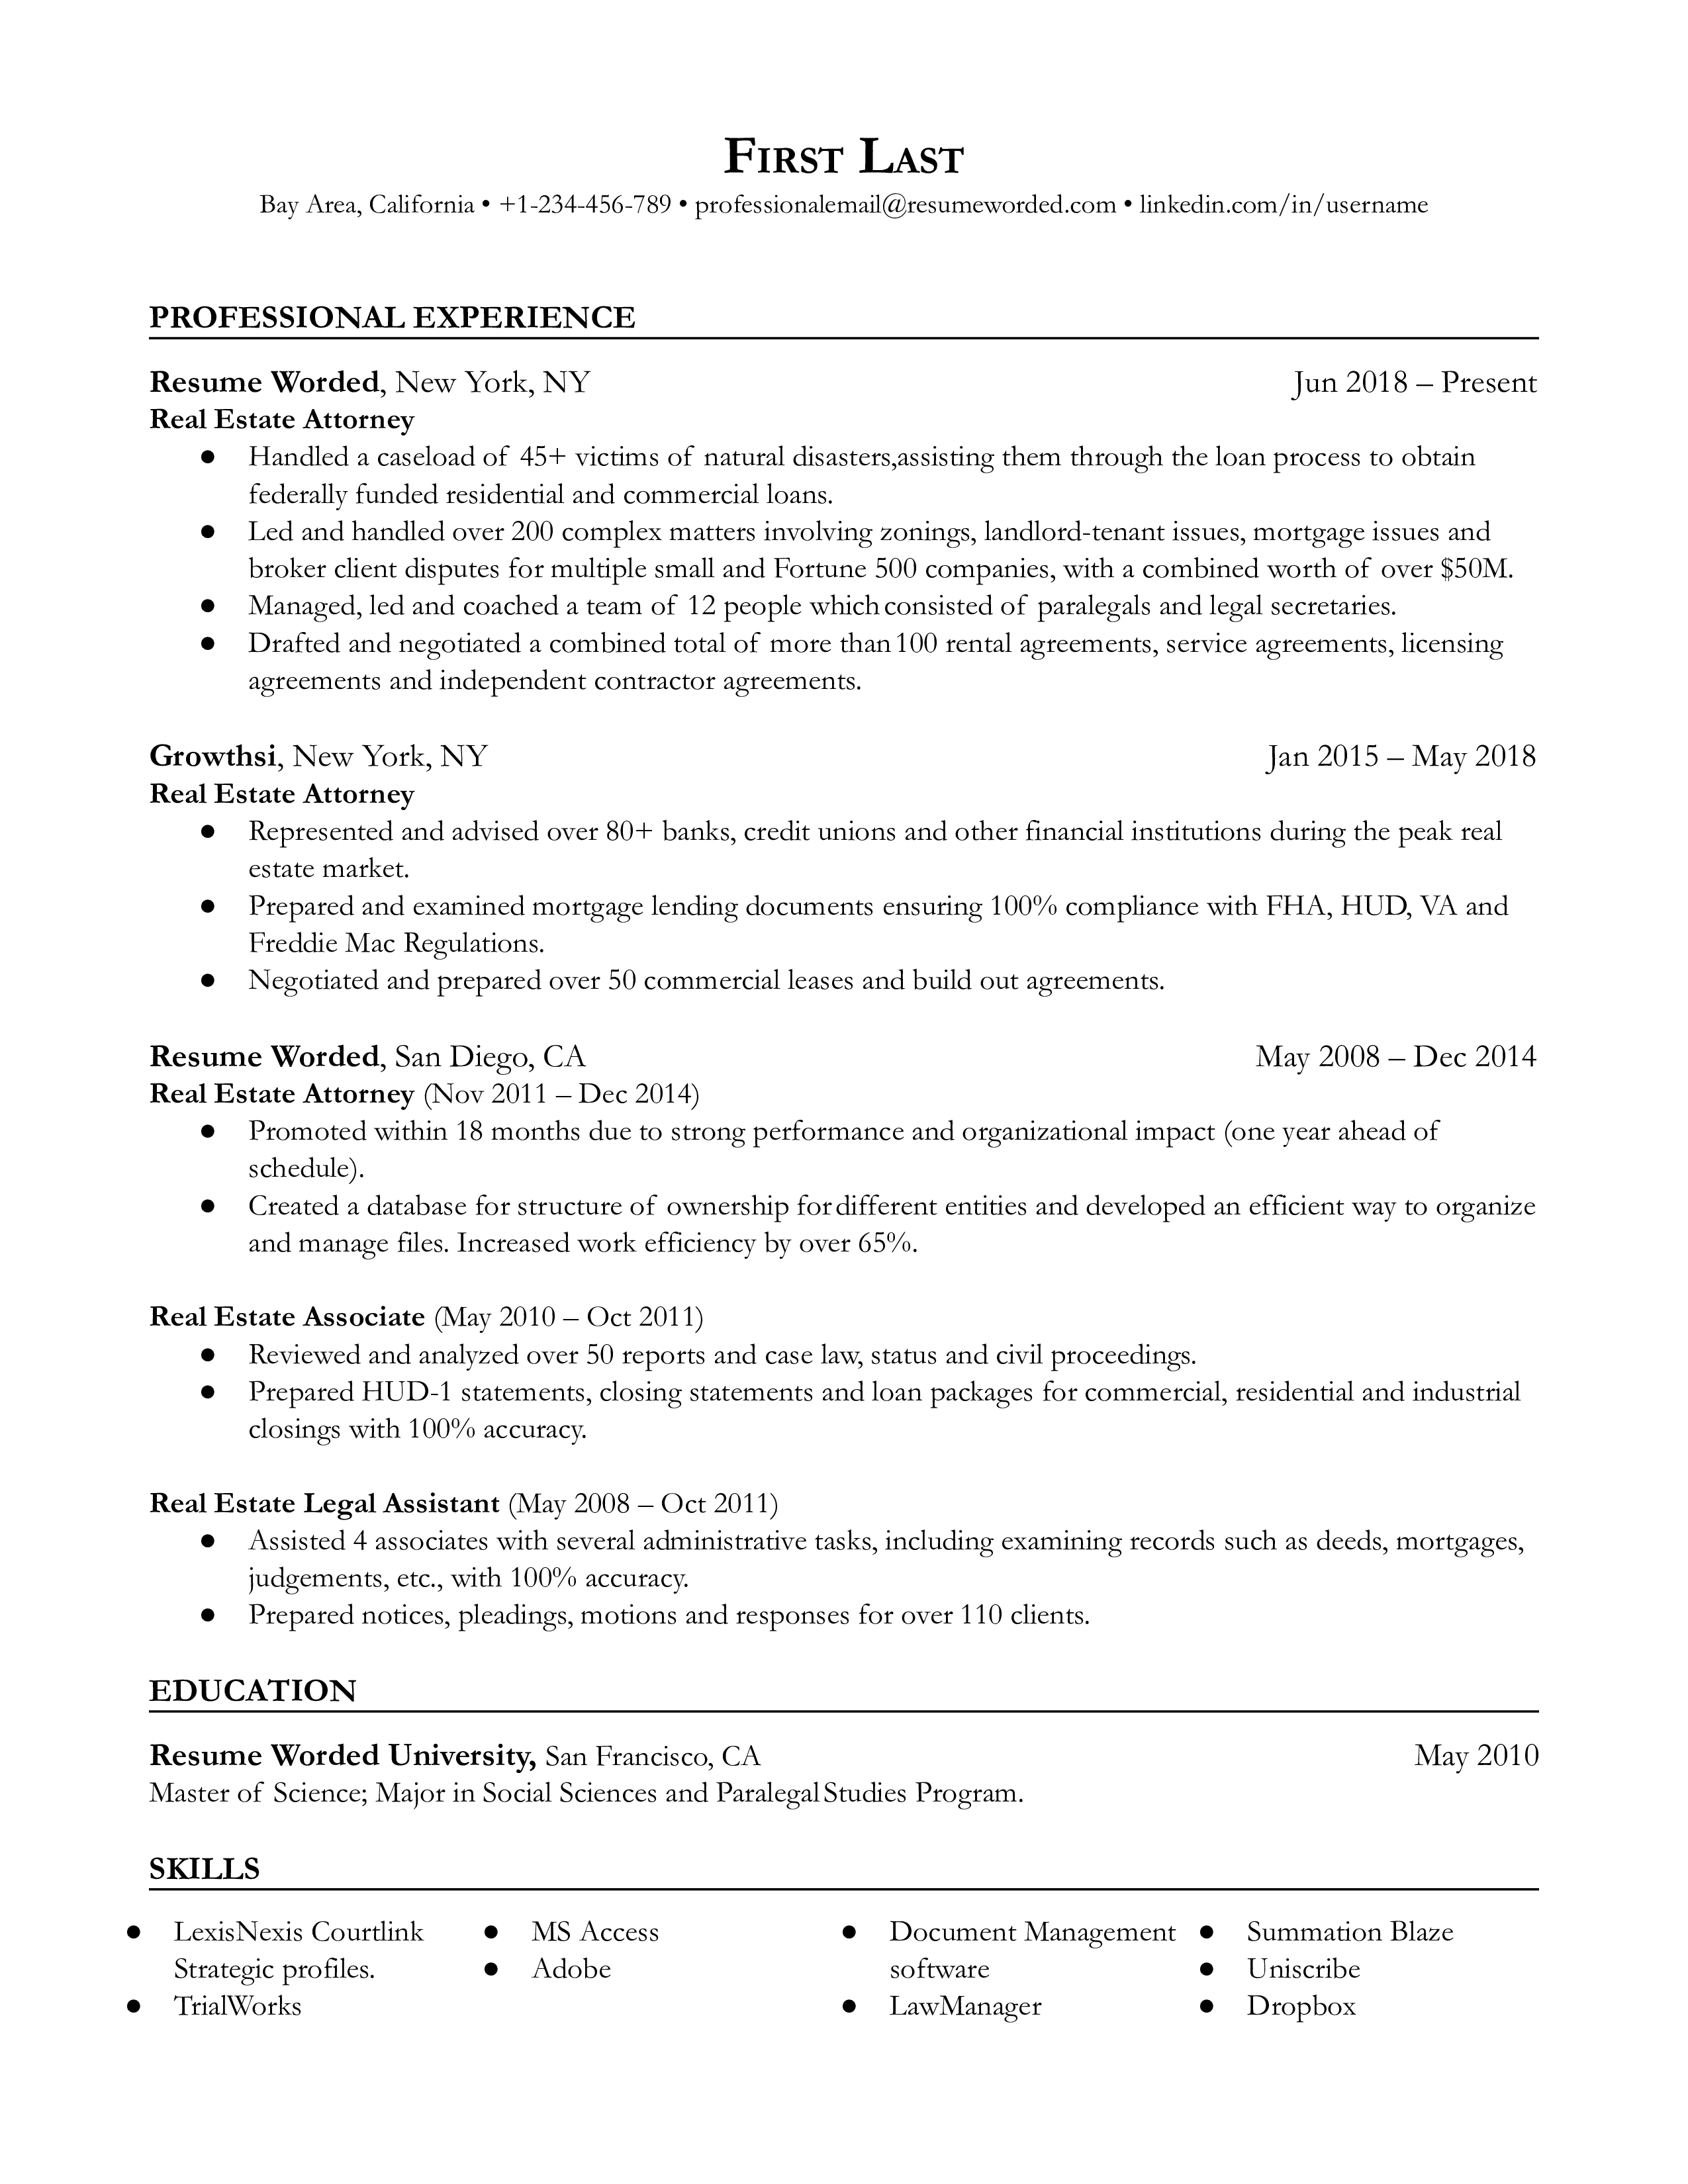 Real estate attorney resume template example focusing on a specific field of law and providing additional context in bullet points